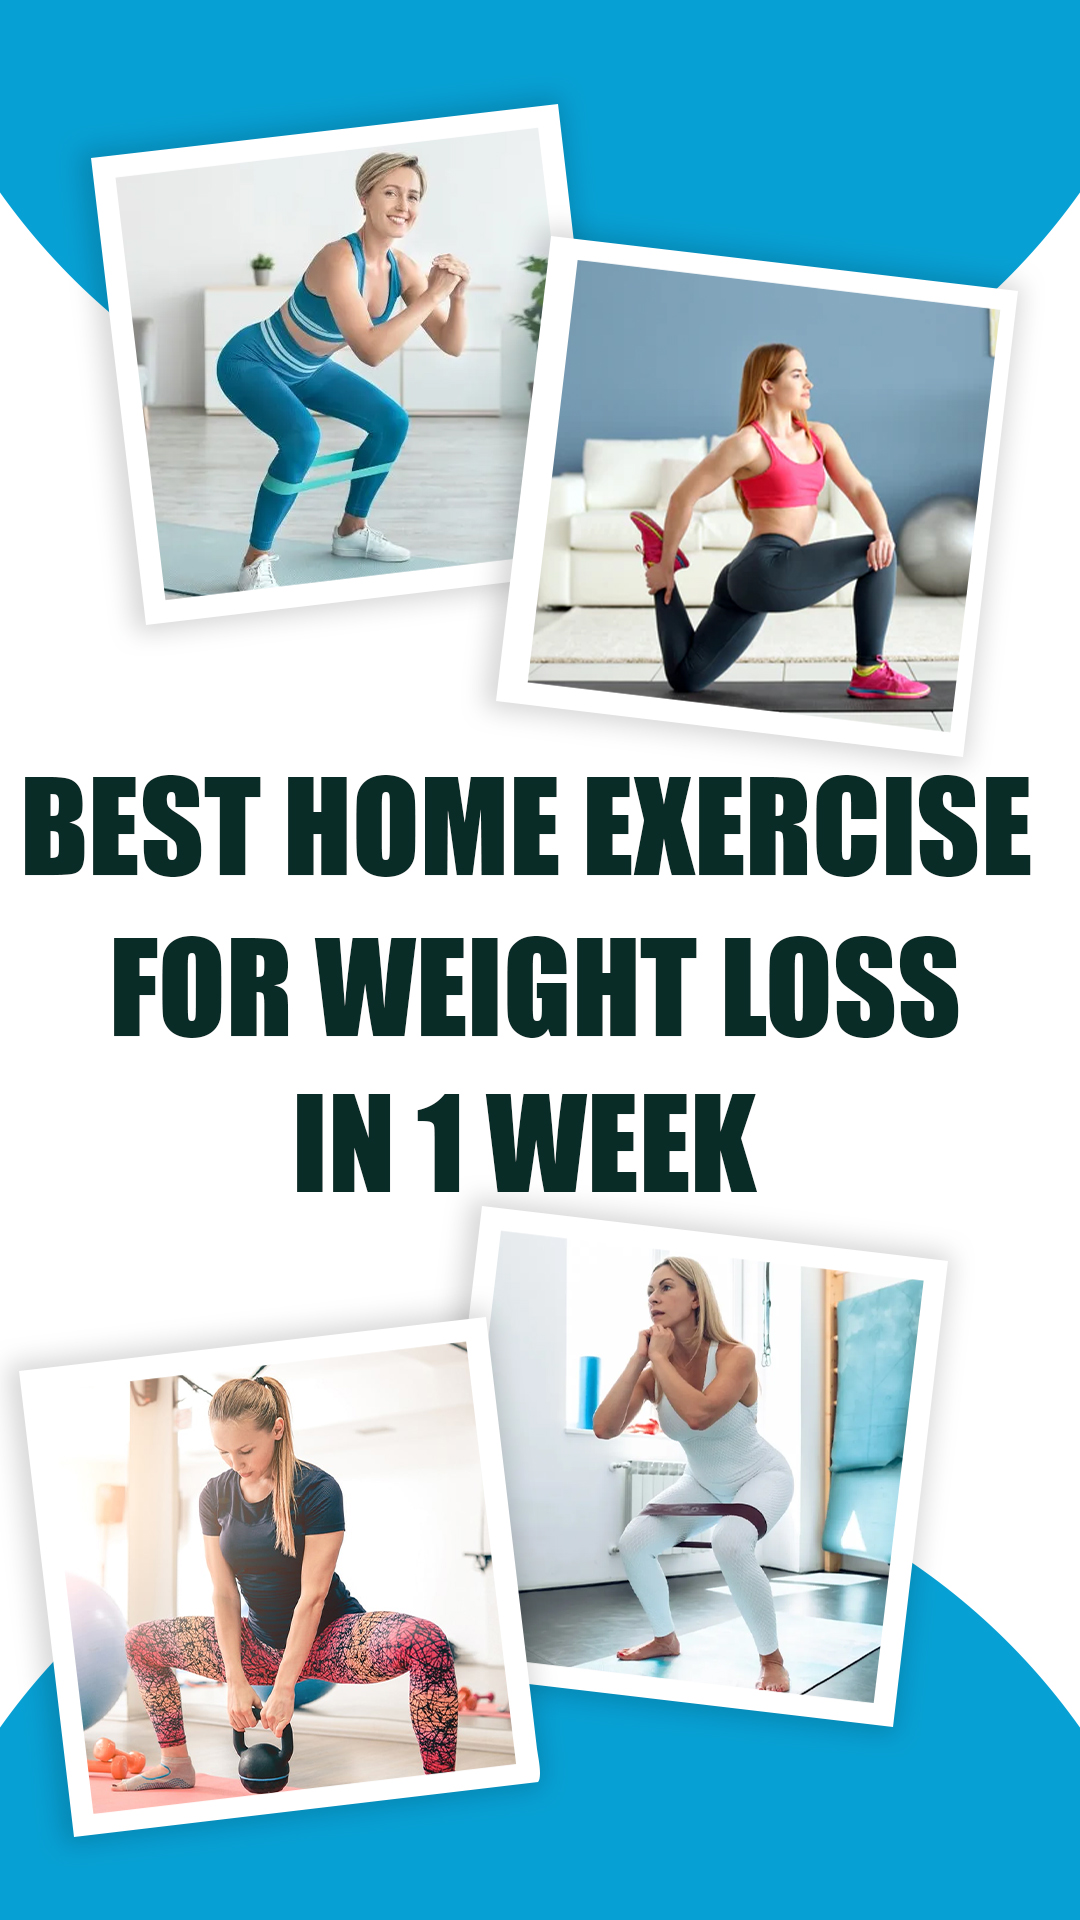 Home Exercises For Weight Loss In 1 Week